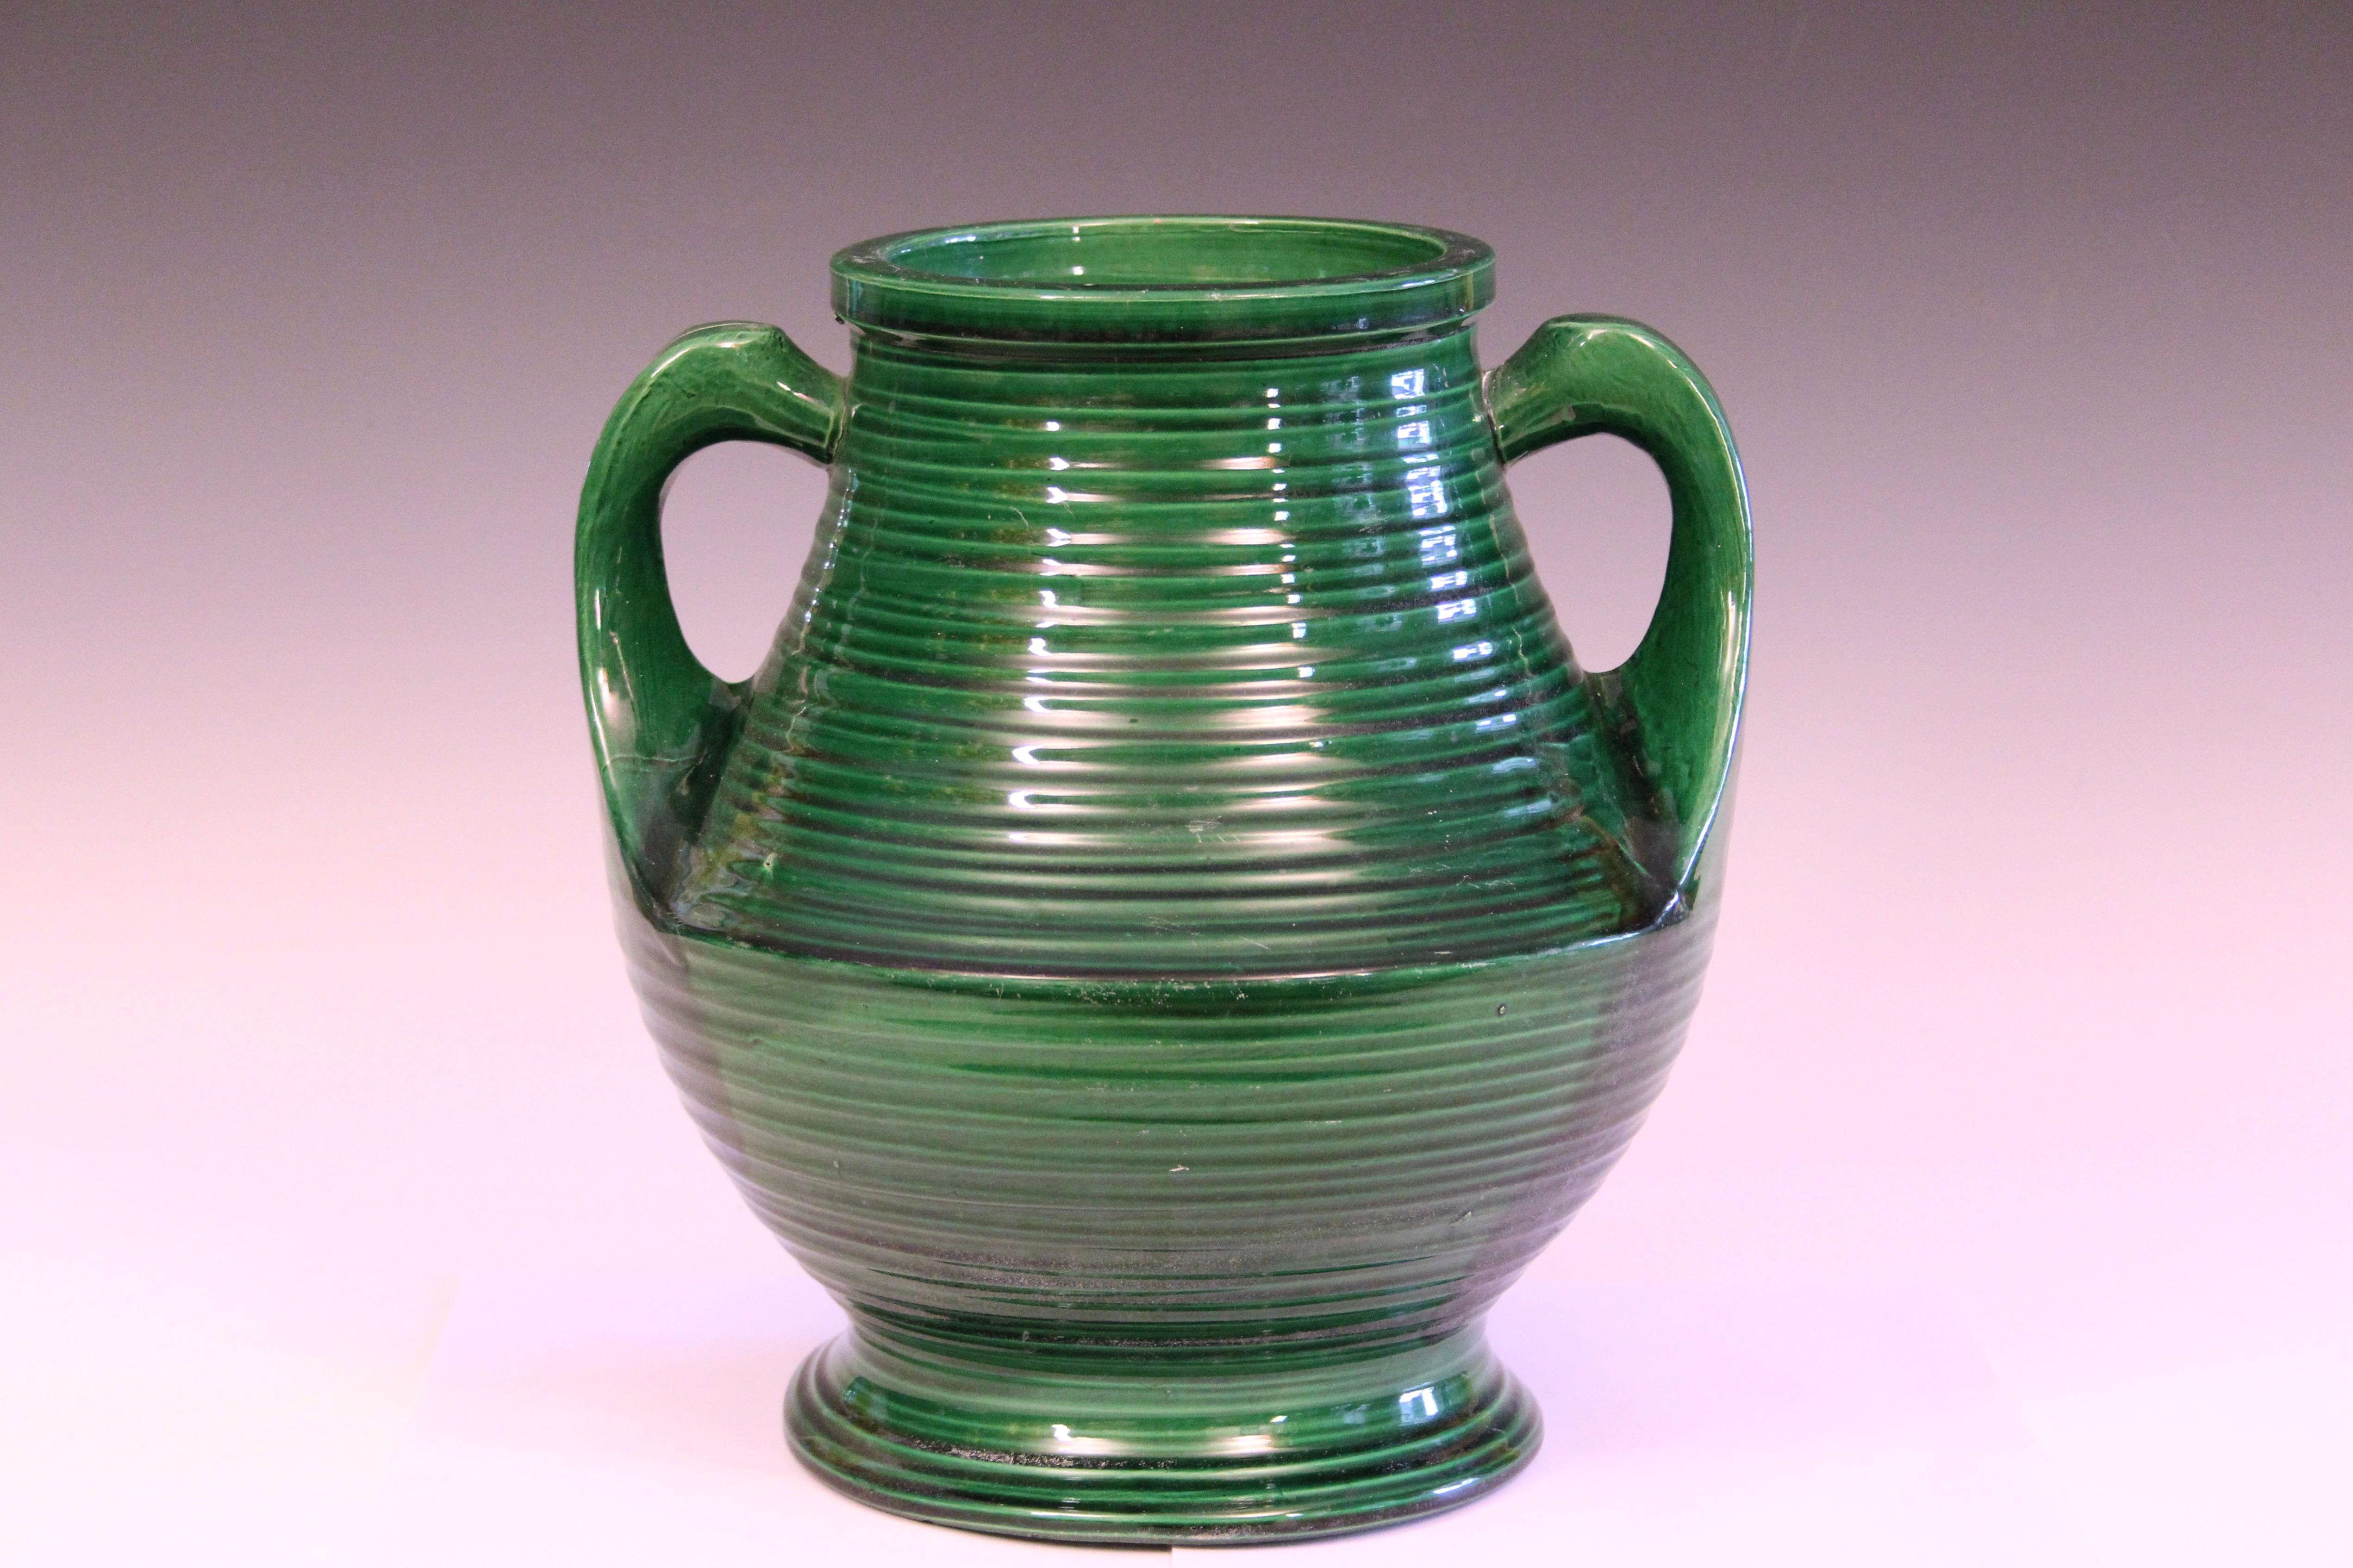 Antique Awaji pottery vase in Hu form with with big wing handles and organic swirled grooves and great emerald green monochrome glaze, circa 1920. Measures: 12